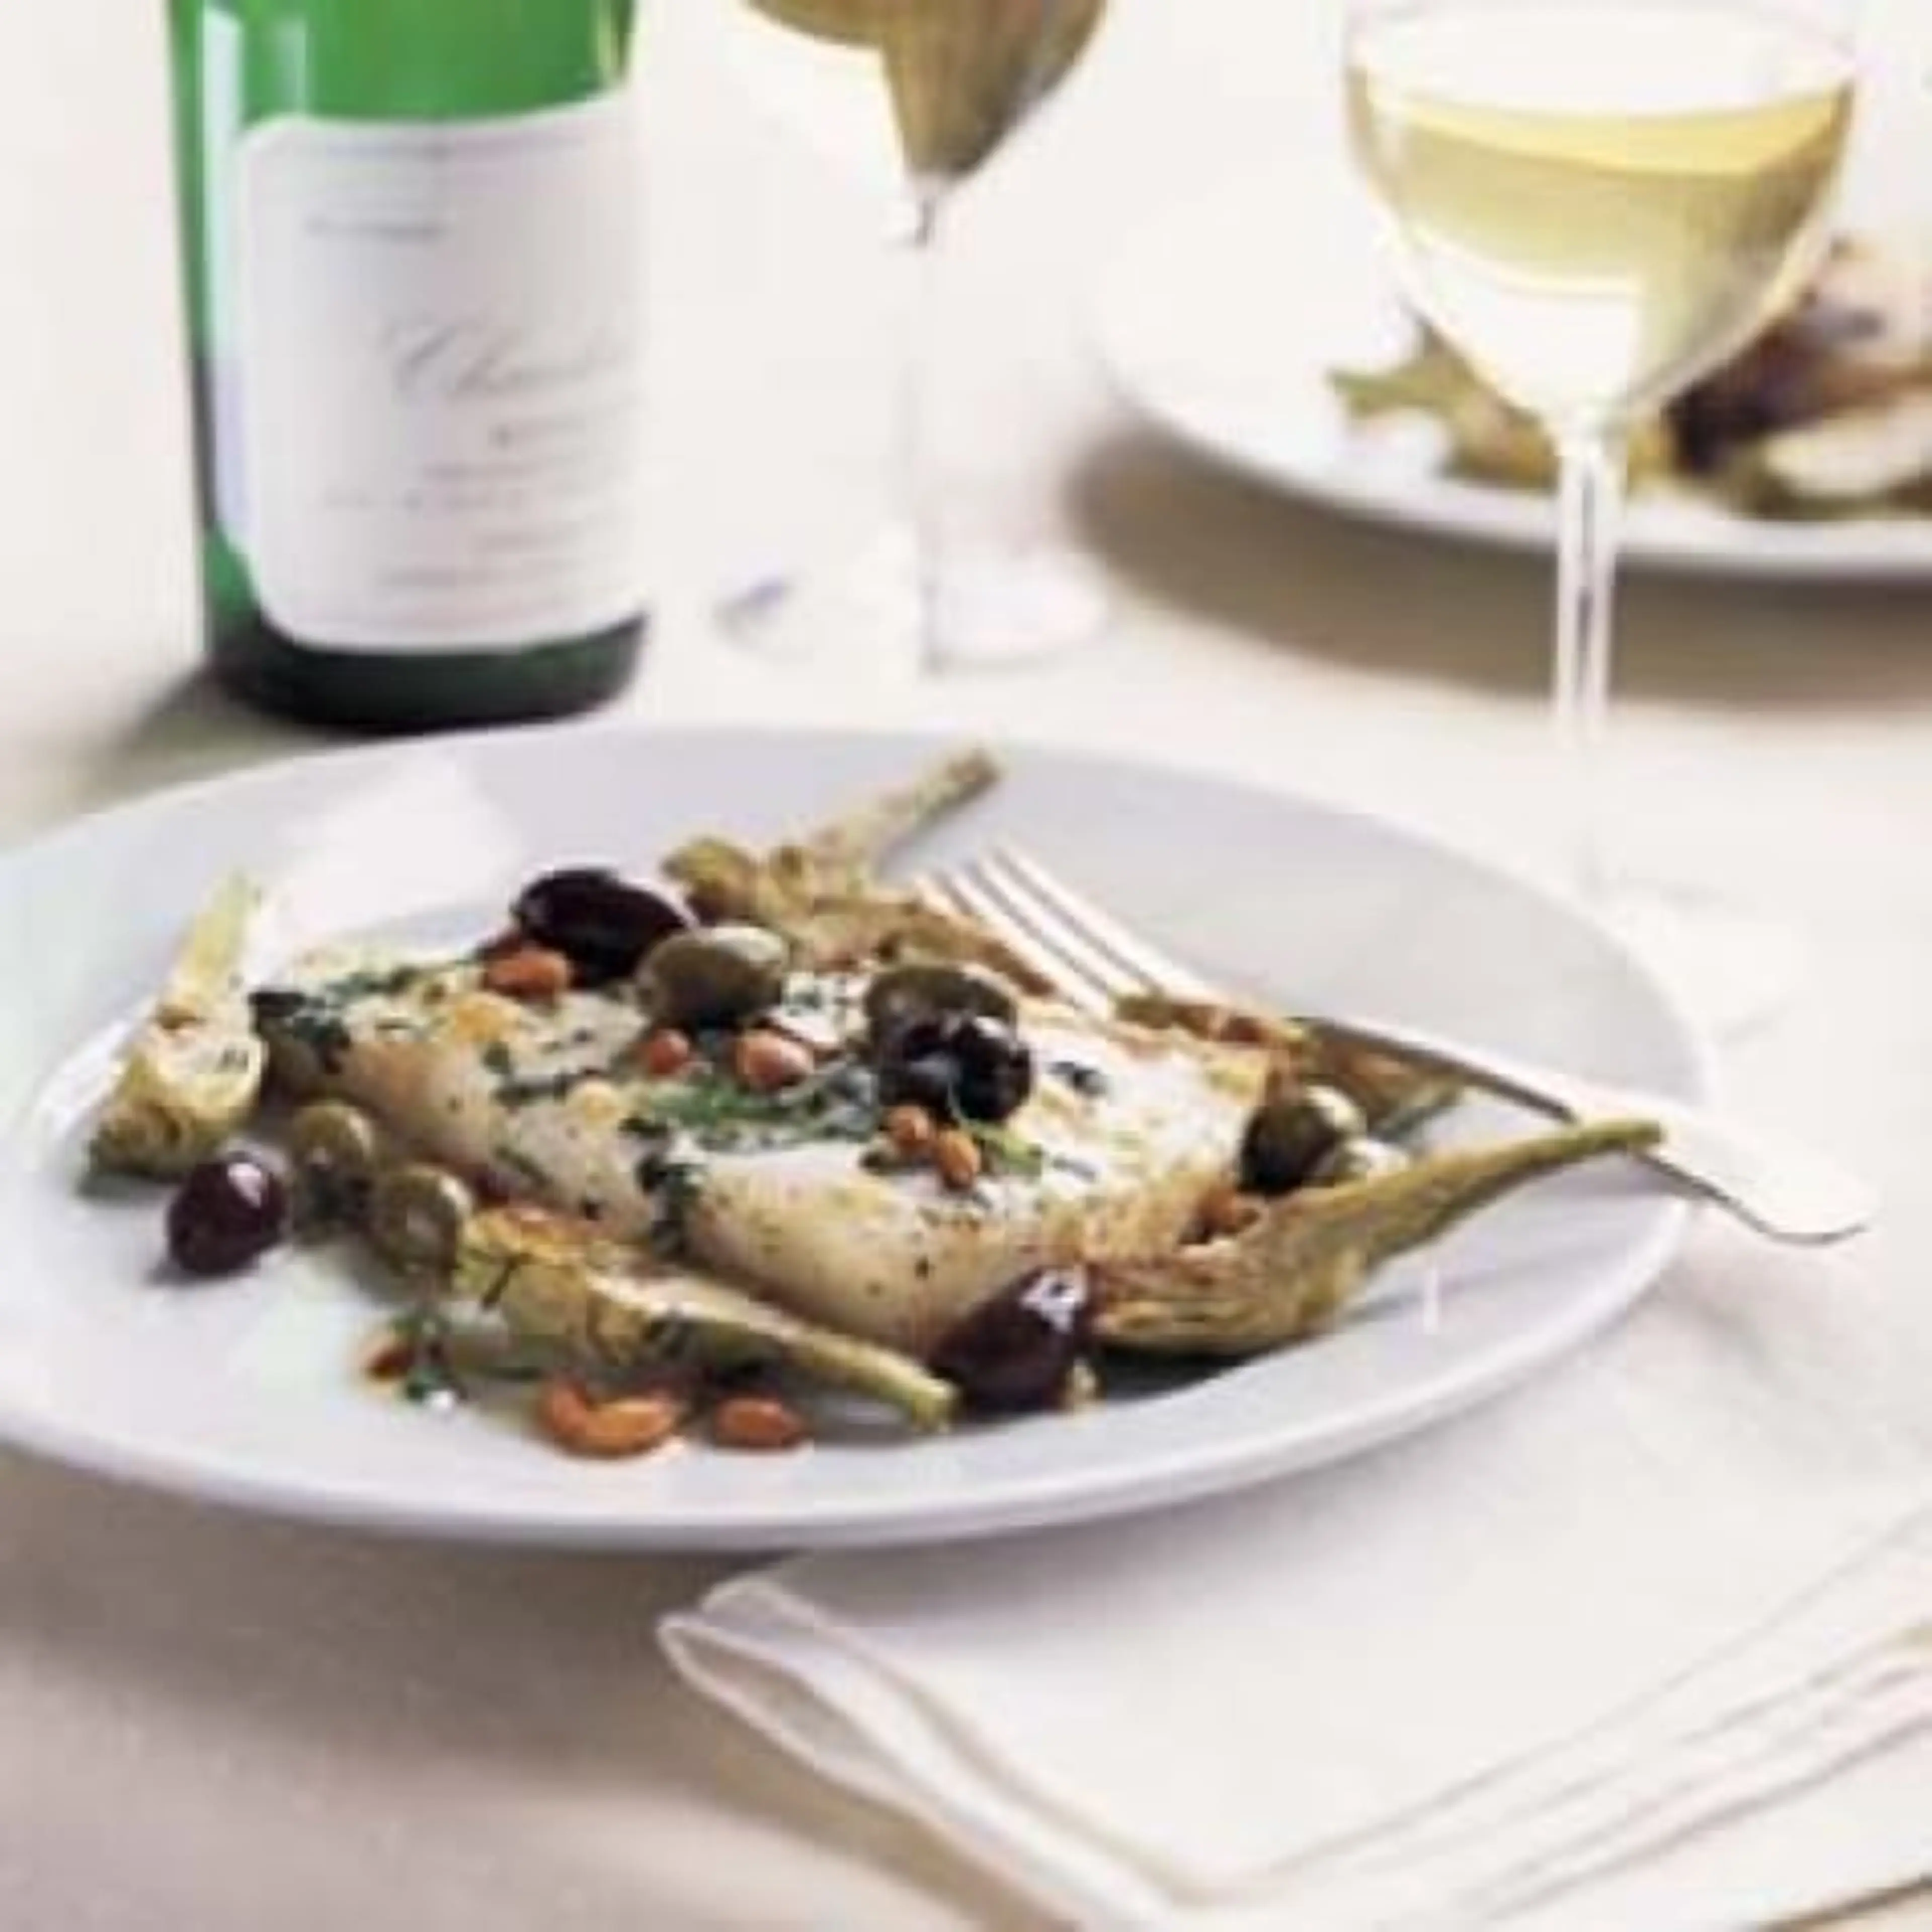 Fish with Olives, Pine Nuts, Basil and Wine